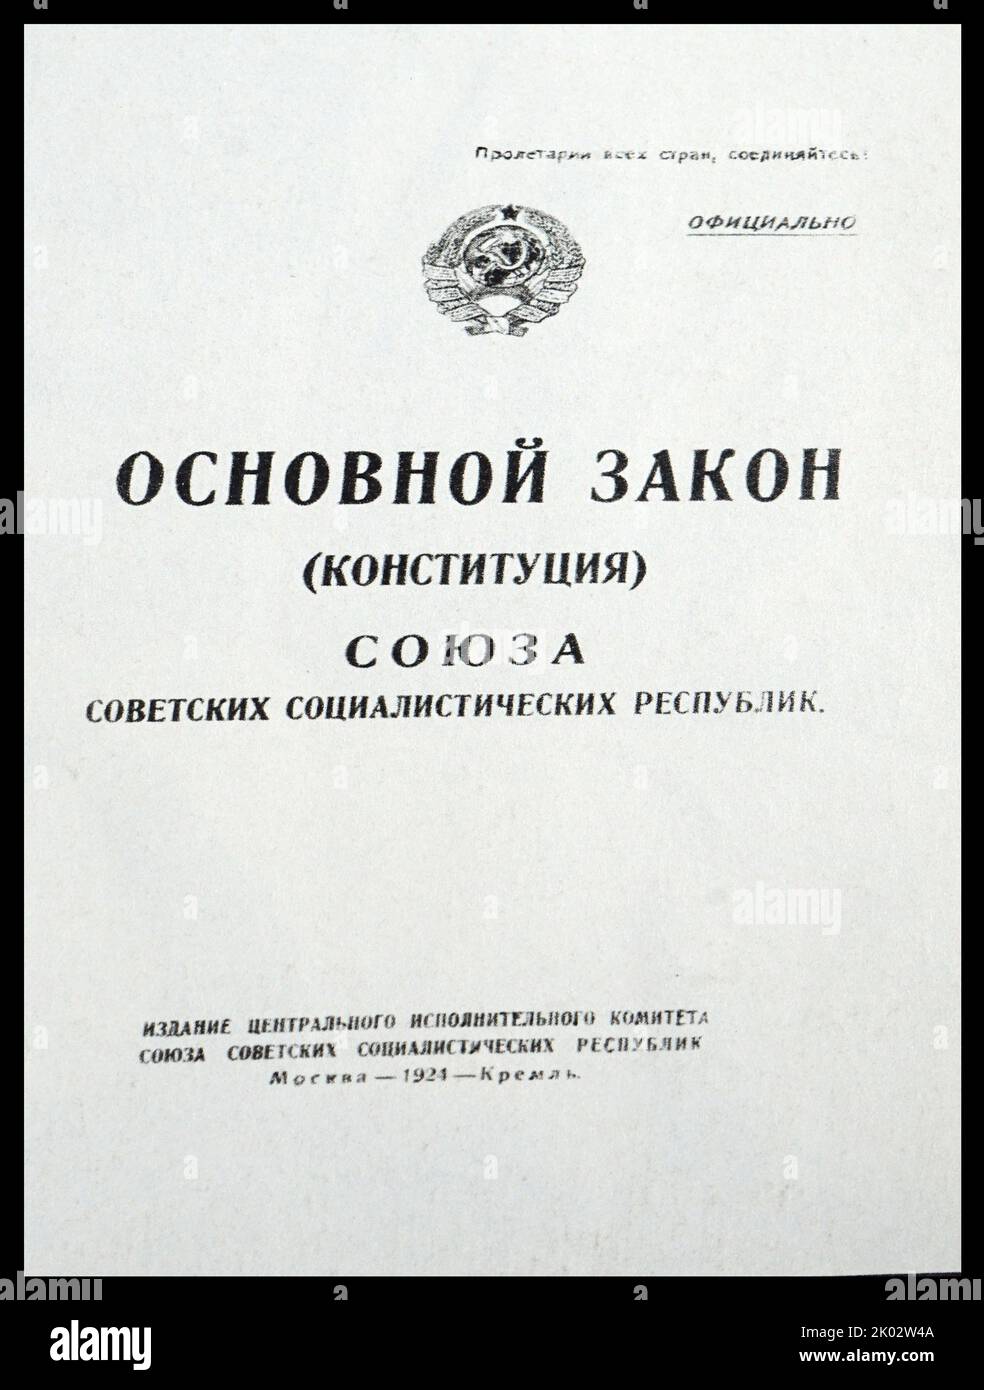 The first Constitution of the USSR. On December 30, 1922, the first All-Union Congress of Soviets opened at the Bolshoi Theater in Moscow, which unanimously adopted the declaration on the formation of the USSR. The congress elected the USSR Central Executive Committee chaired by M. I. Kalinin. Stock Photo